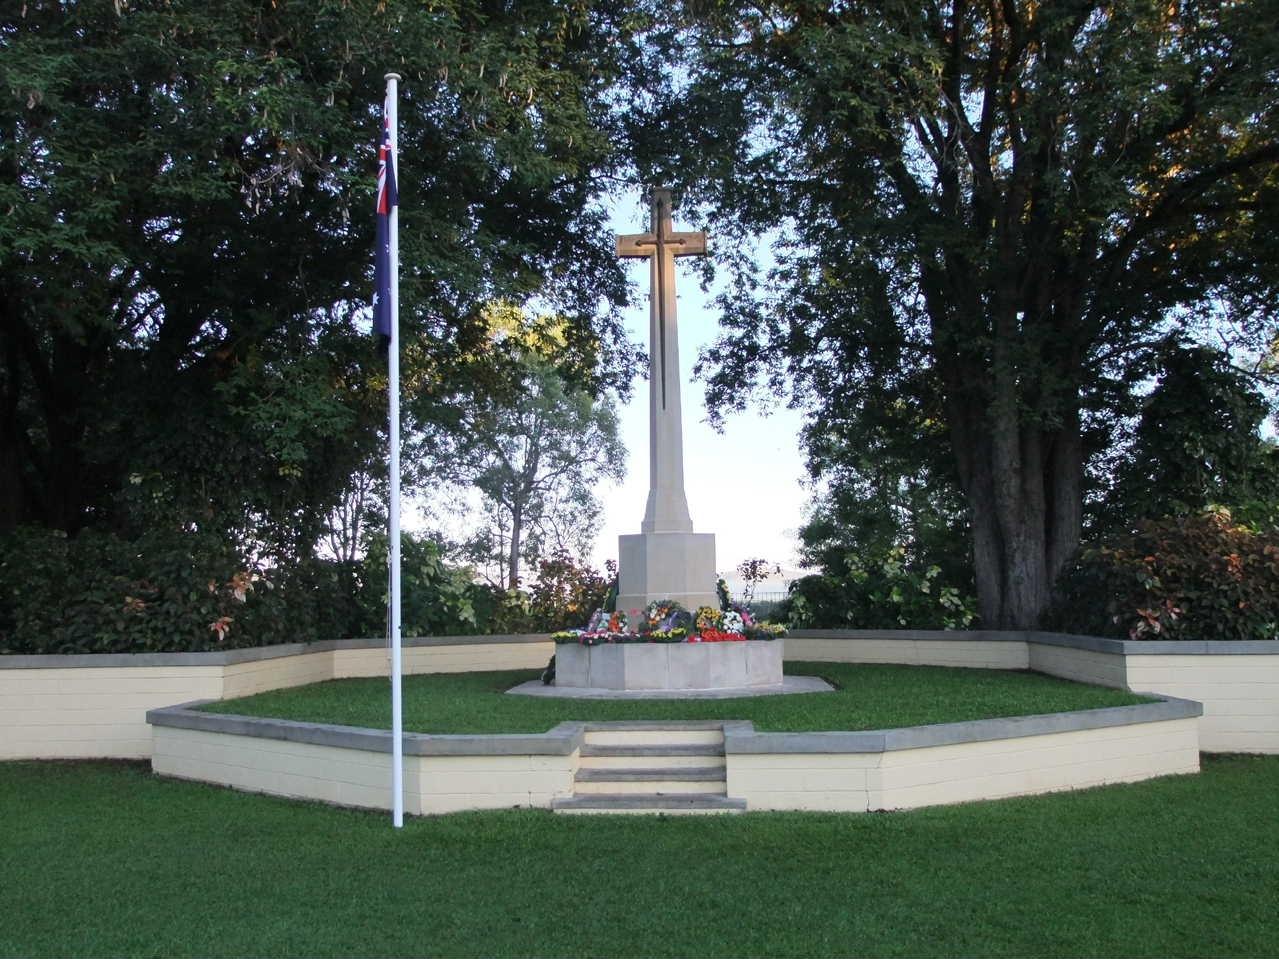 The Adelaide River Anzac Memorial in Coomalie Shire Northern Territory